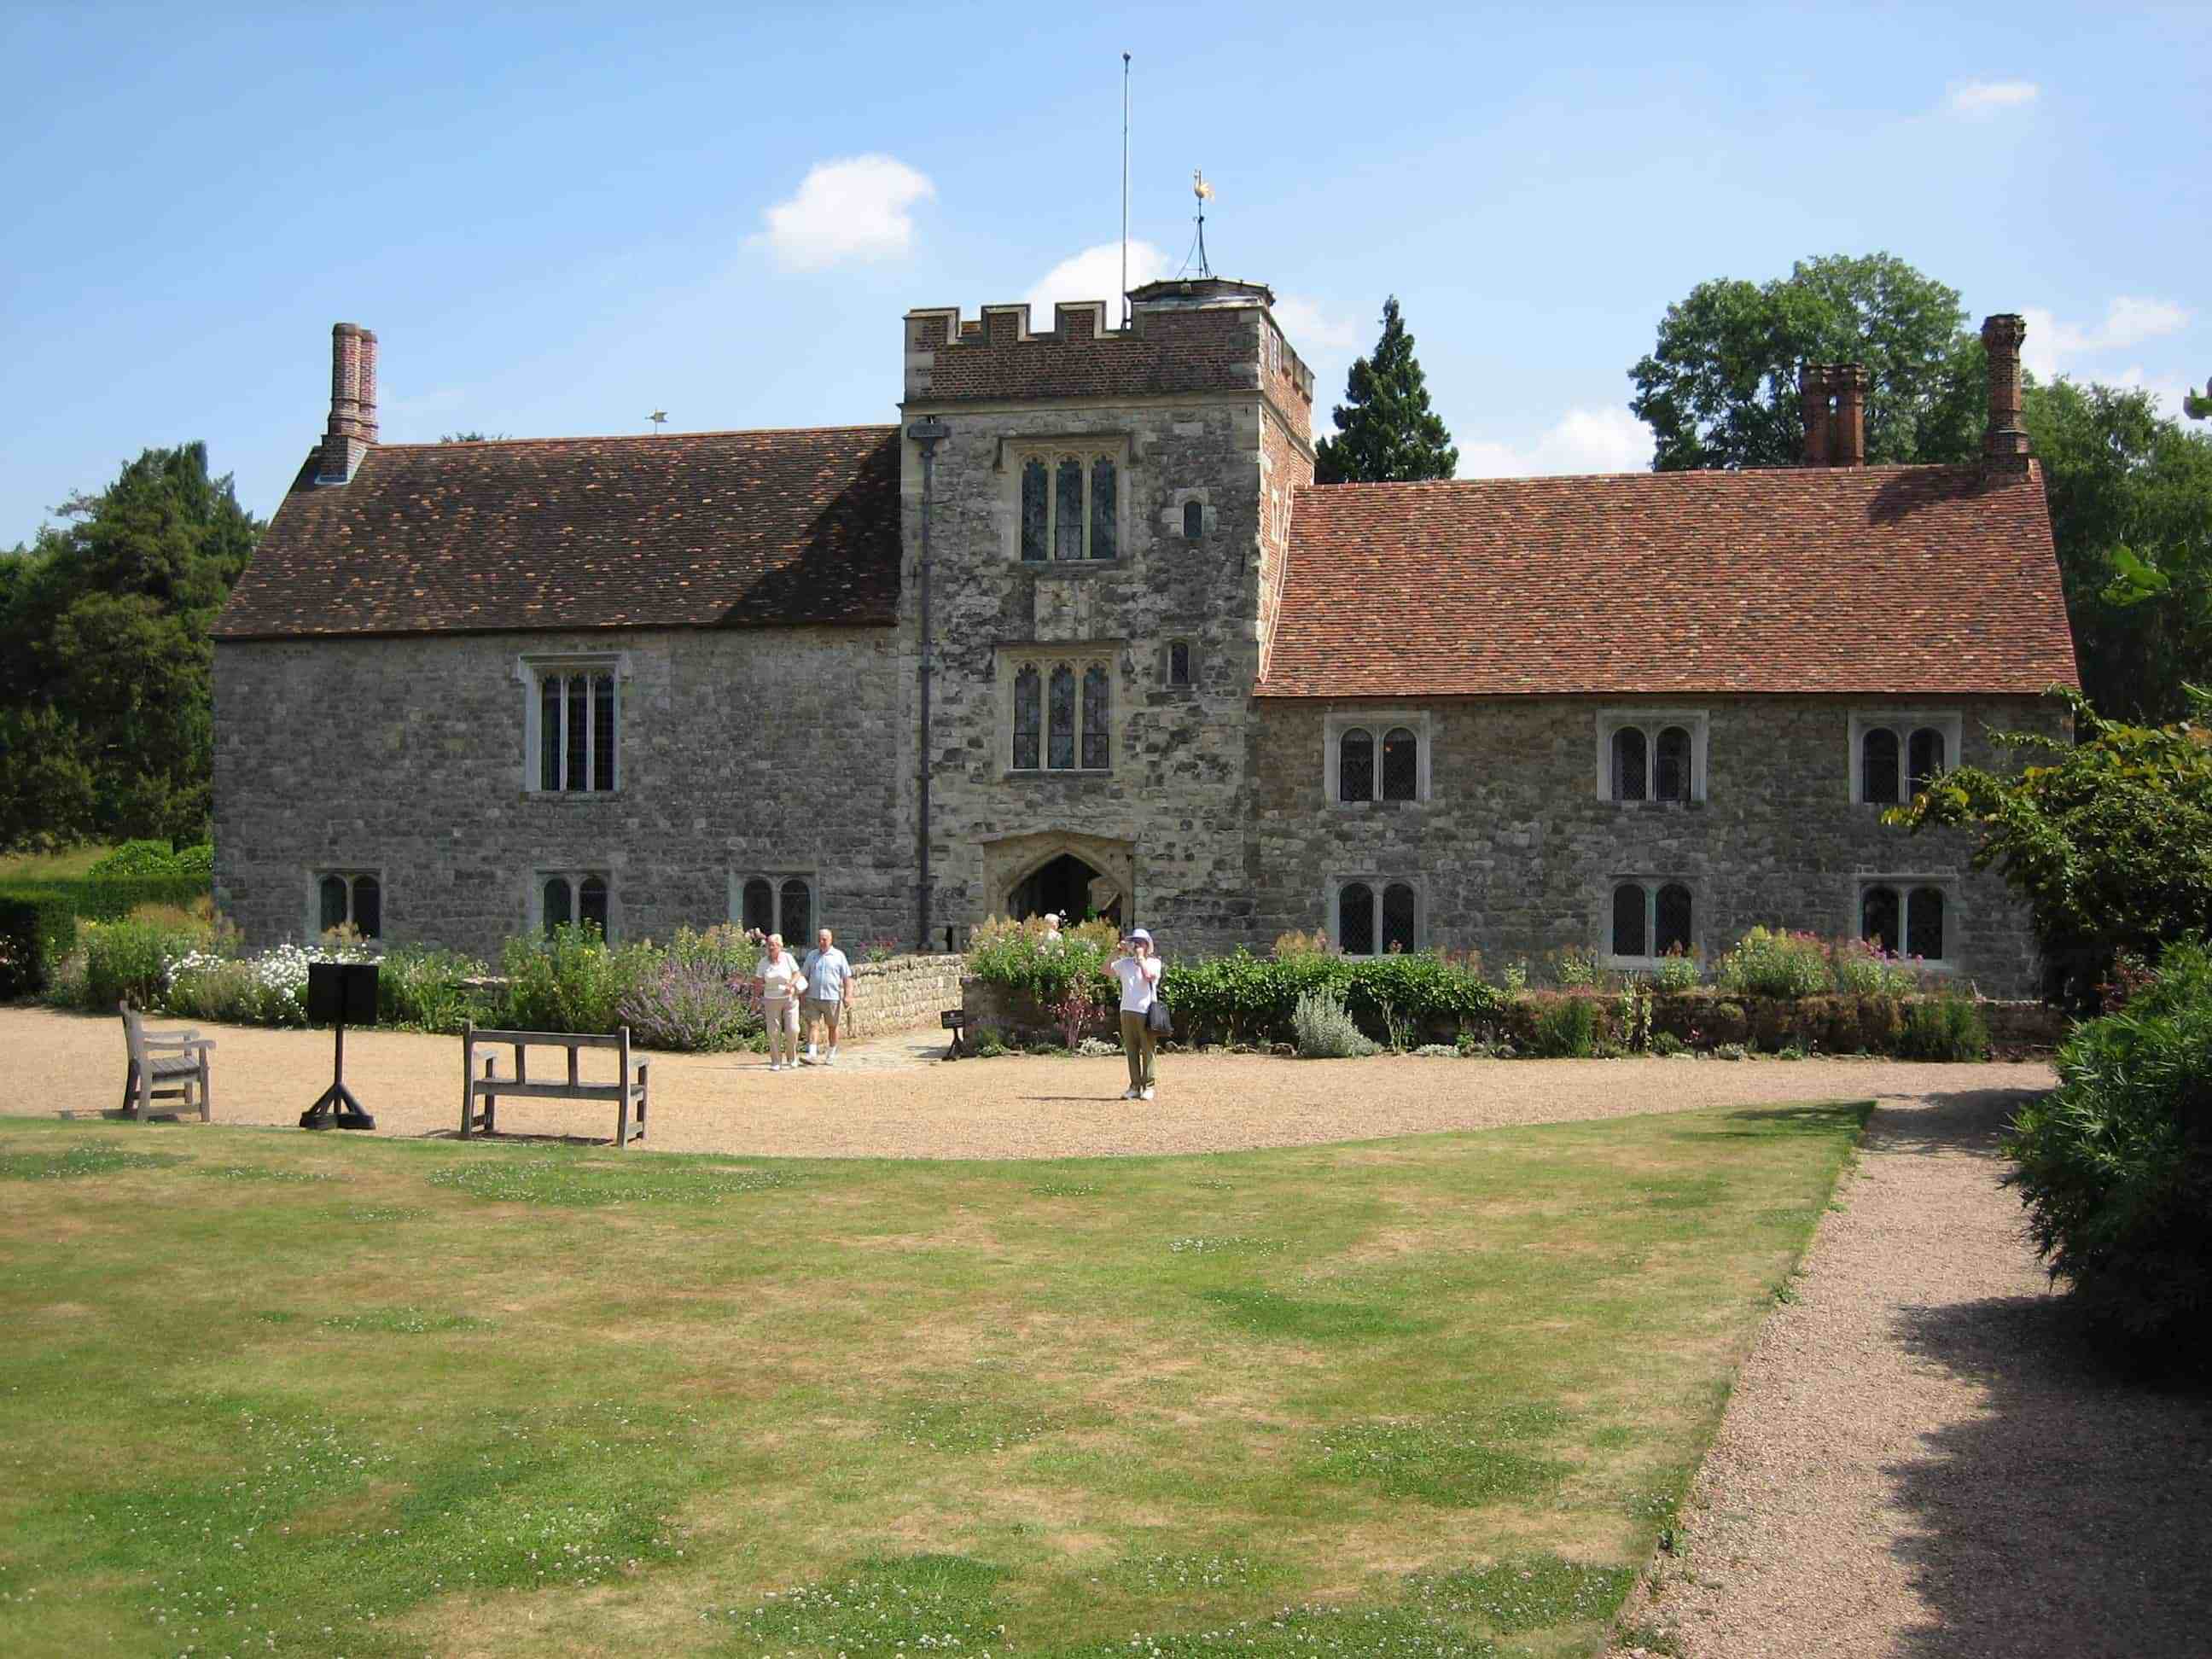 The manor house uk